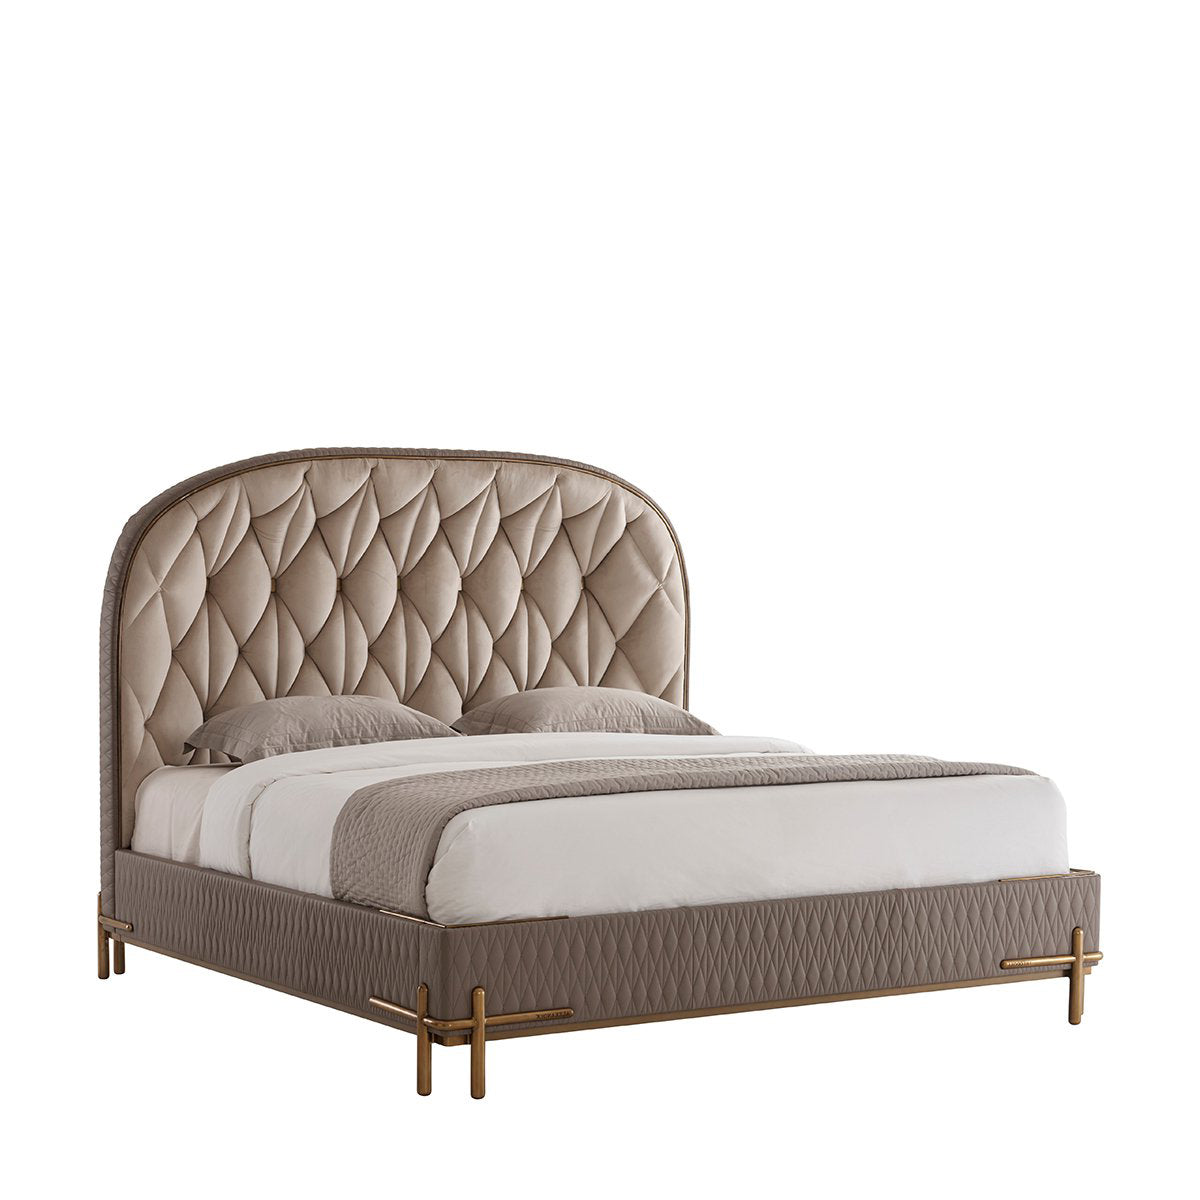 ICONIC UPHOLSTERED US KING BED